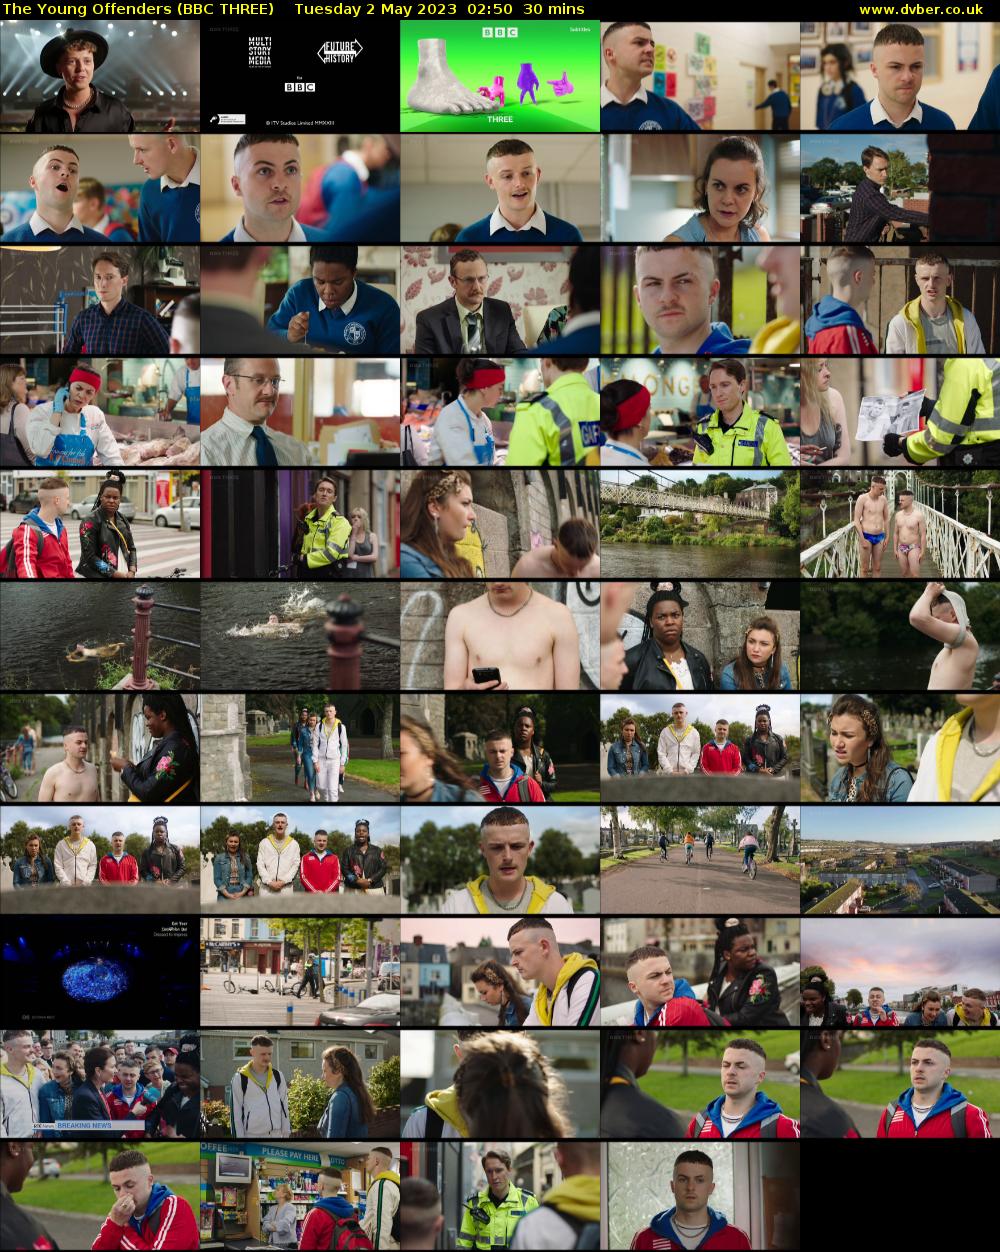 The Young Offenders (BBC THREE) Tuesday 2 May 2023 02:50 - 03:20